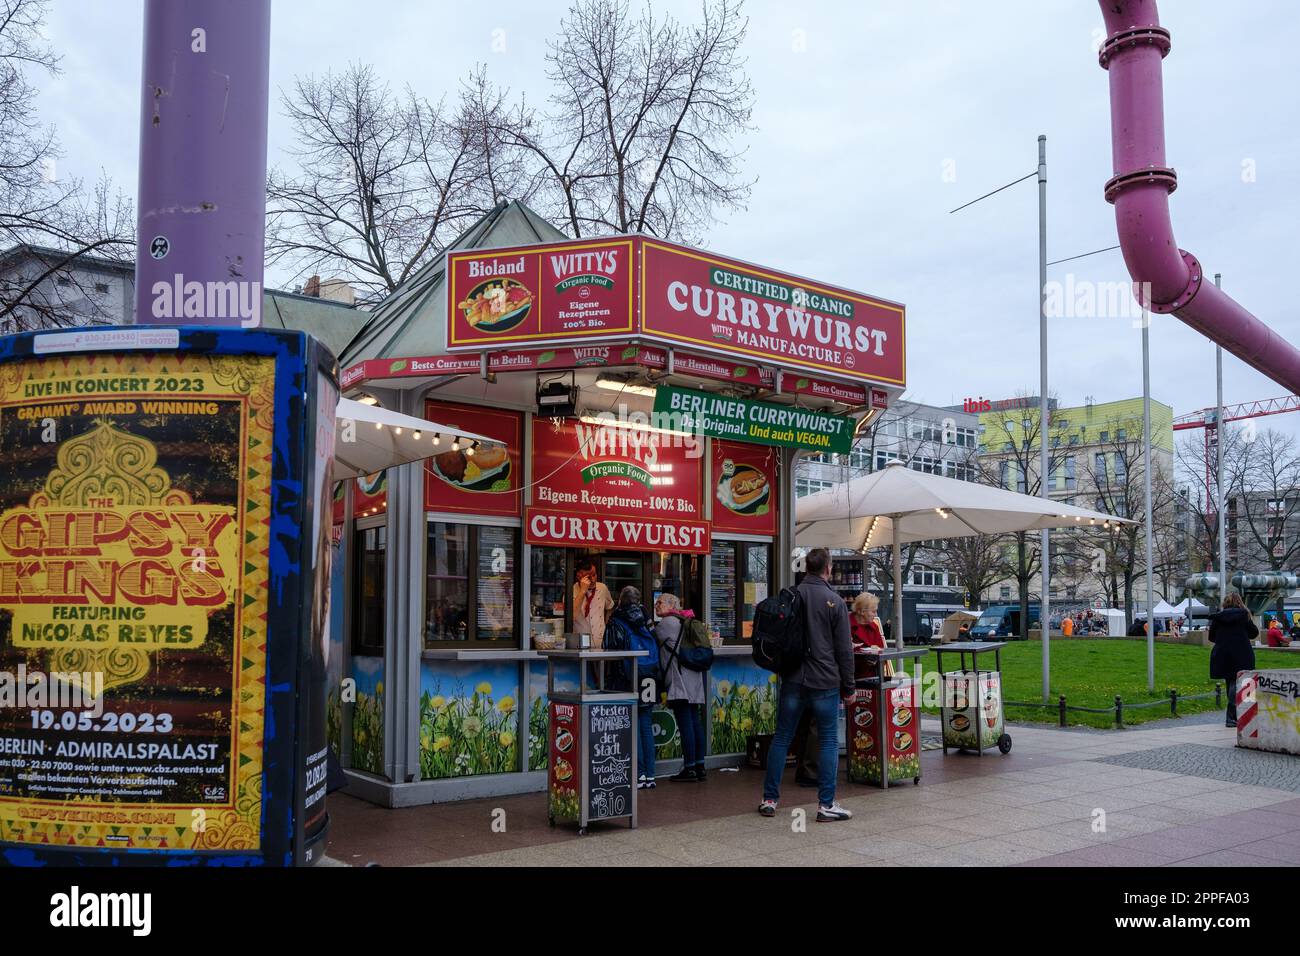 Berlin, Germany - April 18, 2023 : View of a traditional currywurst stand, the sliced pork sausage blended with curry in Berlin Germany Stock Photo